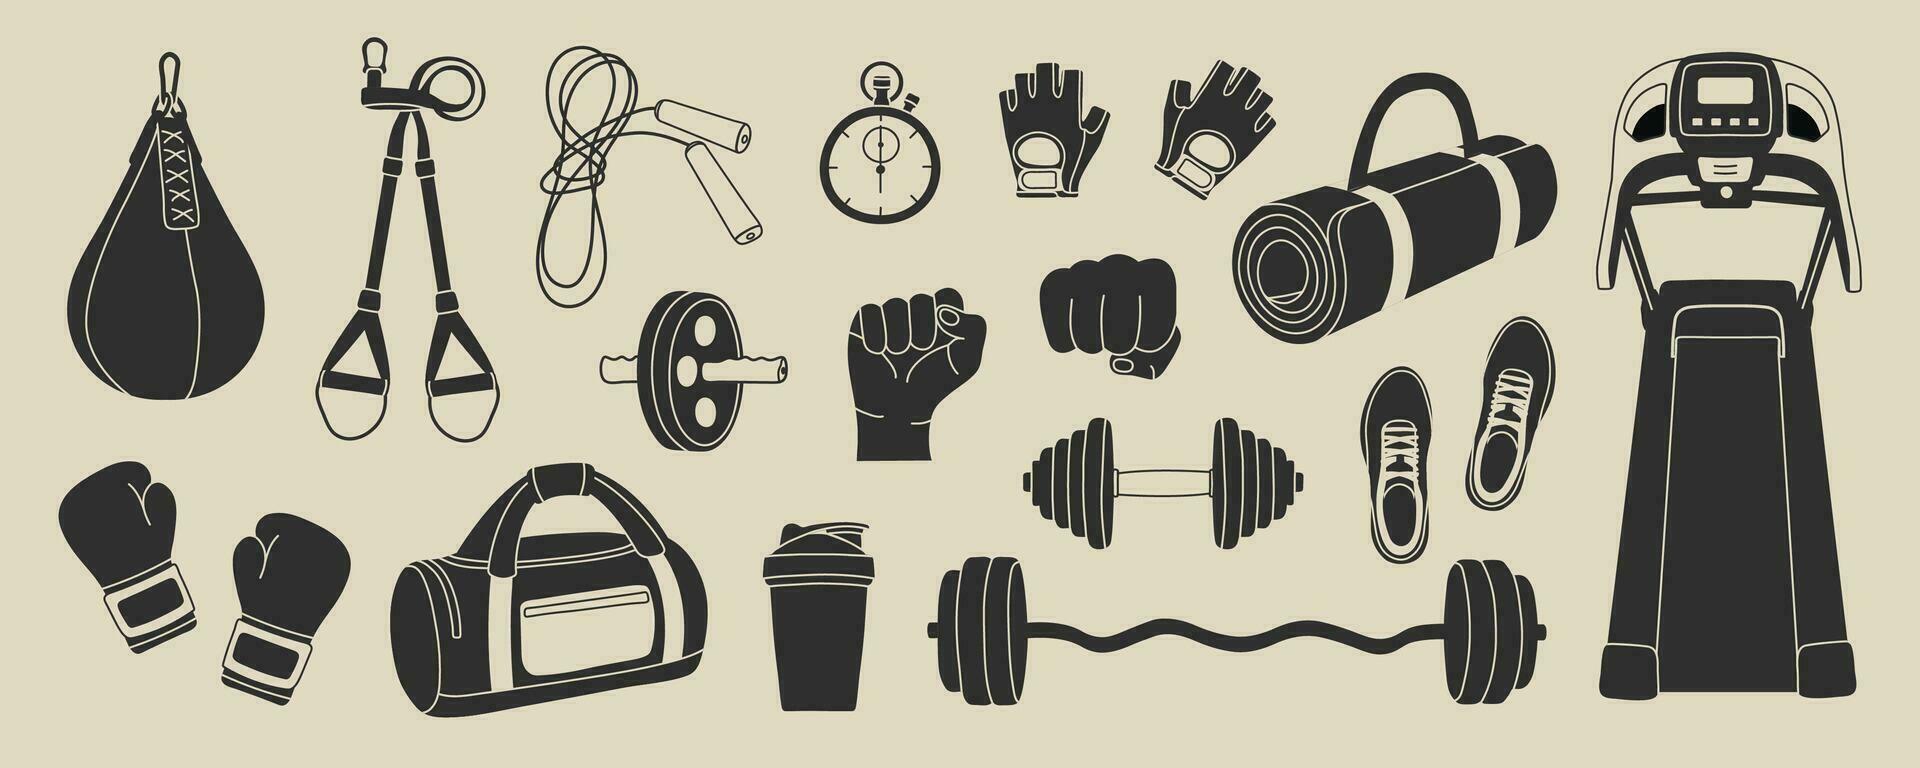 Sport equipment elements in modern flat line style. Hand drawn fitness inventory, gym accessories vector illustrations. Healthy lifestyle. Dumbbell, sport bag, barbell, fist, shoes, boxing gloves.